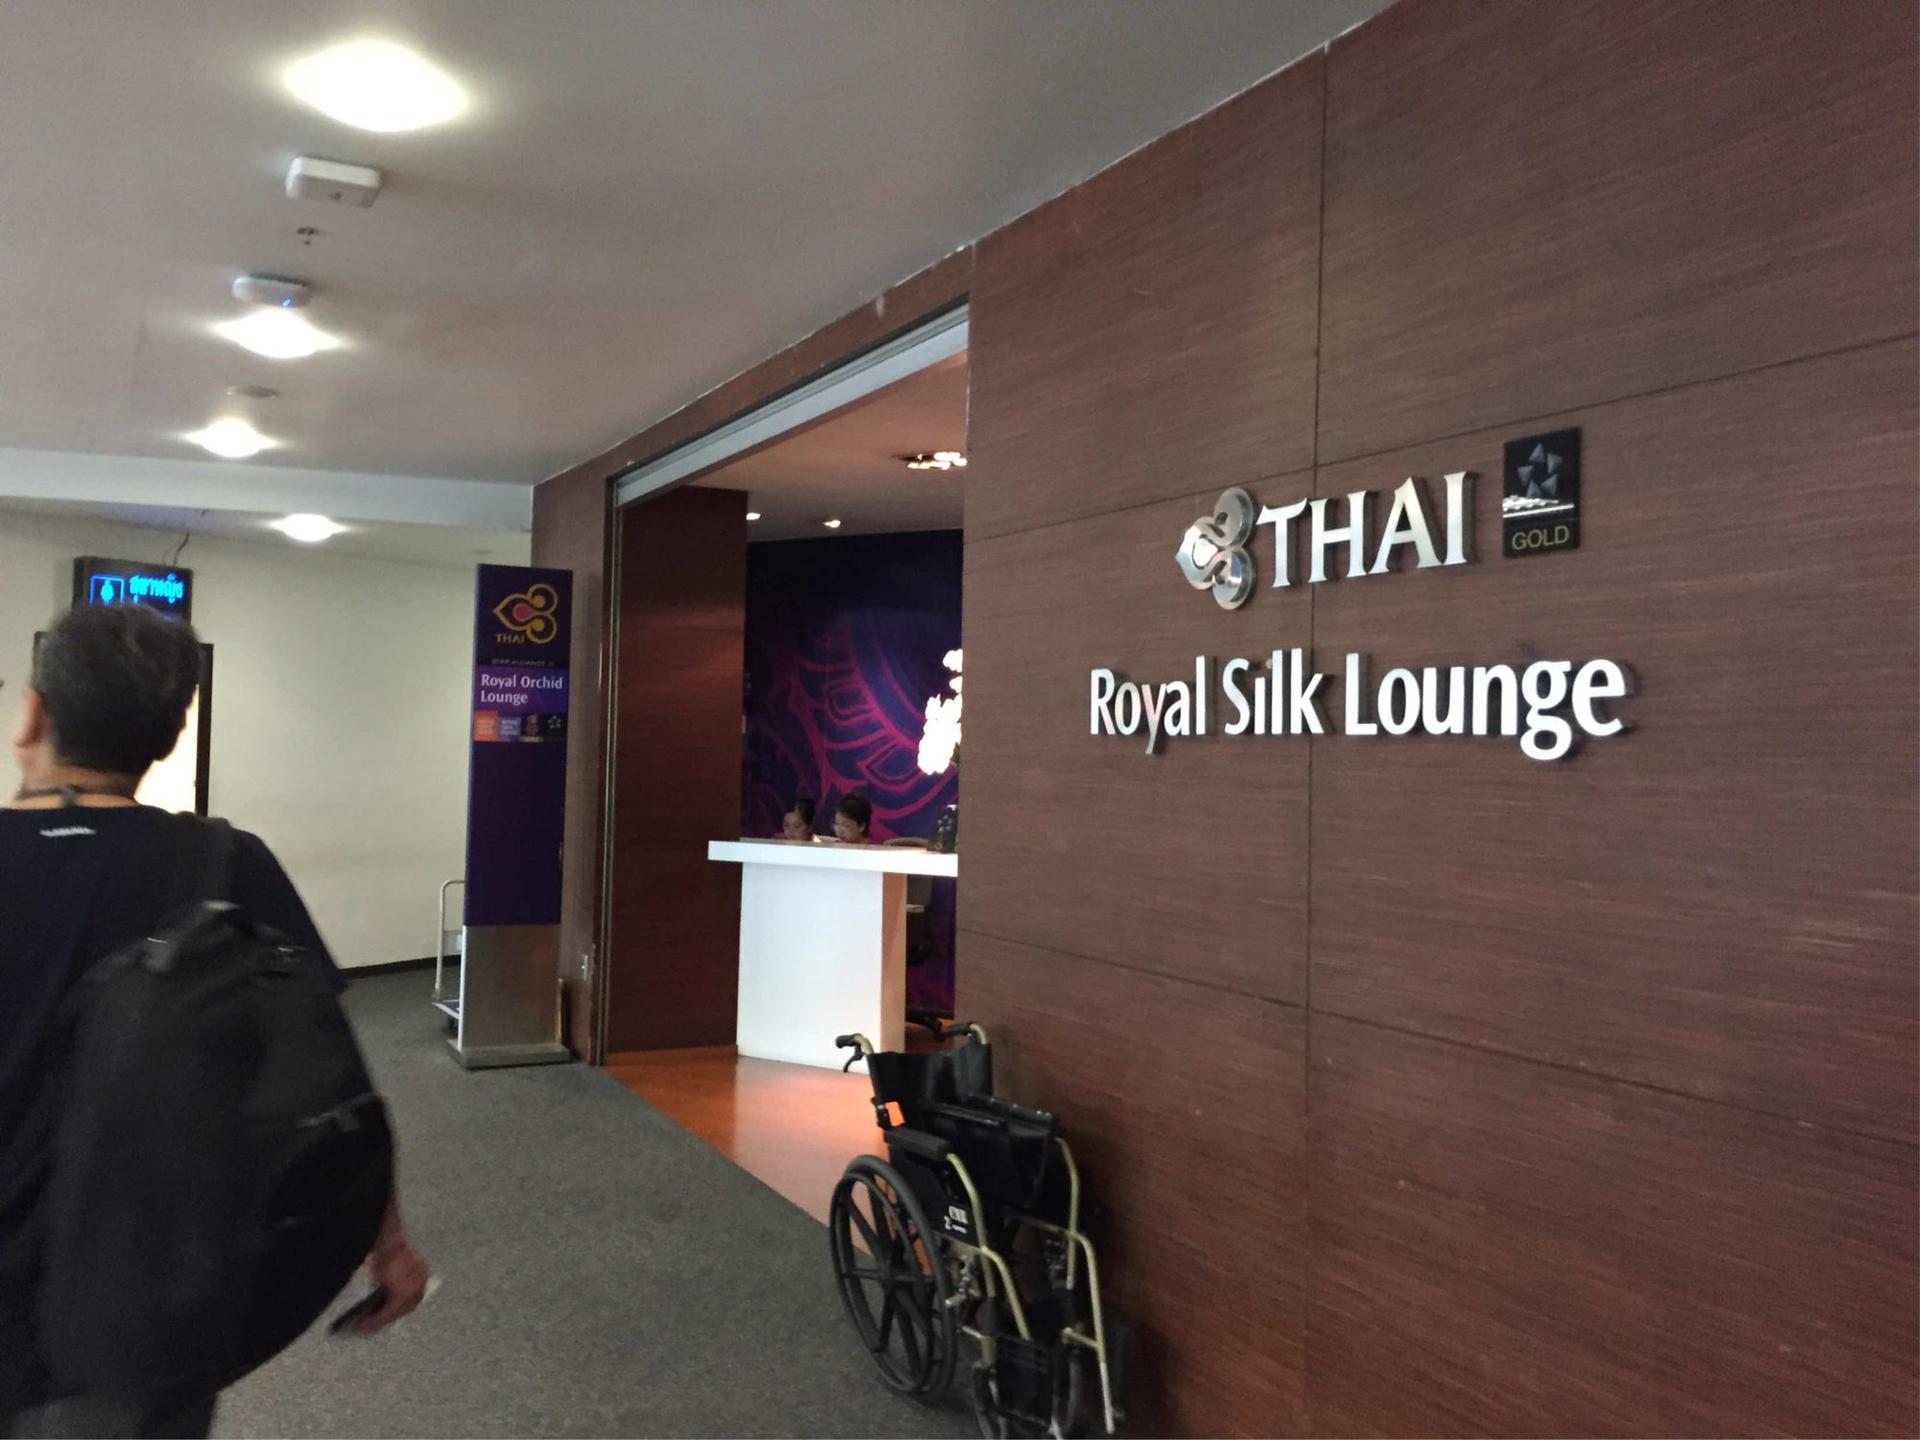 Thai Airways Royal Orchid Lounge image 3 of 22